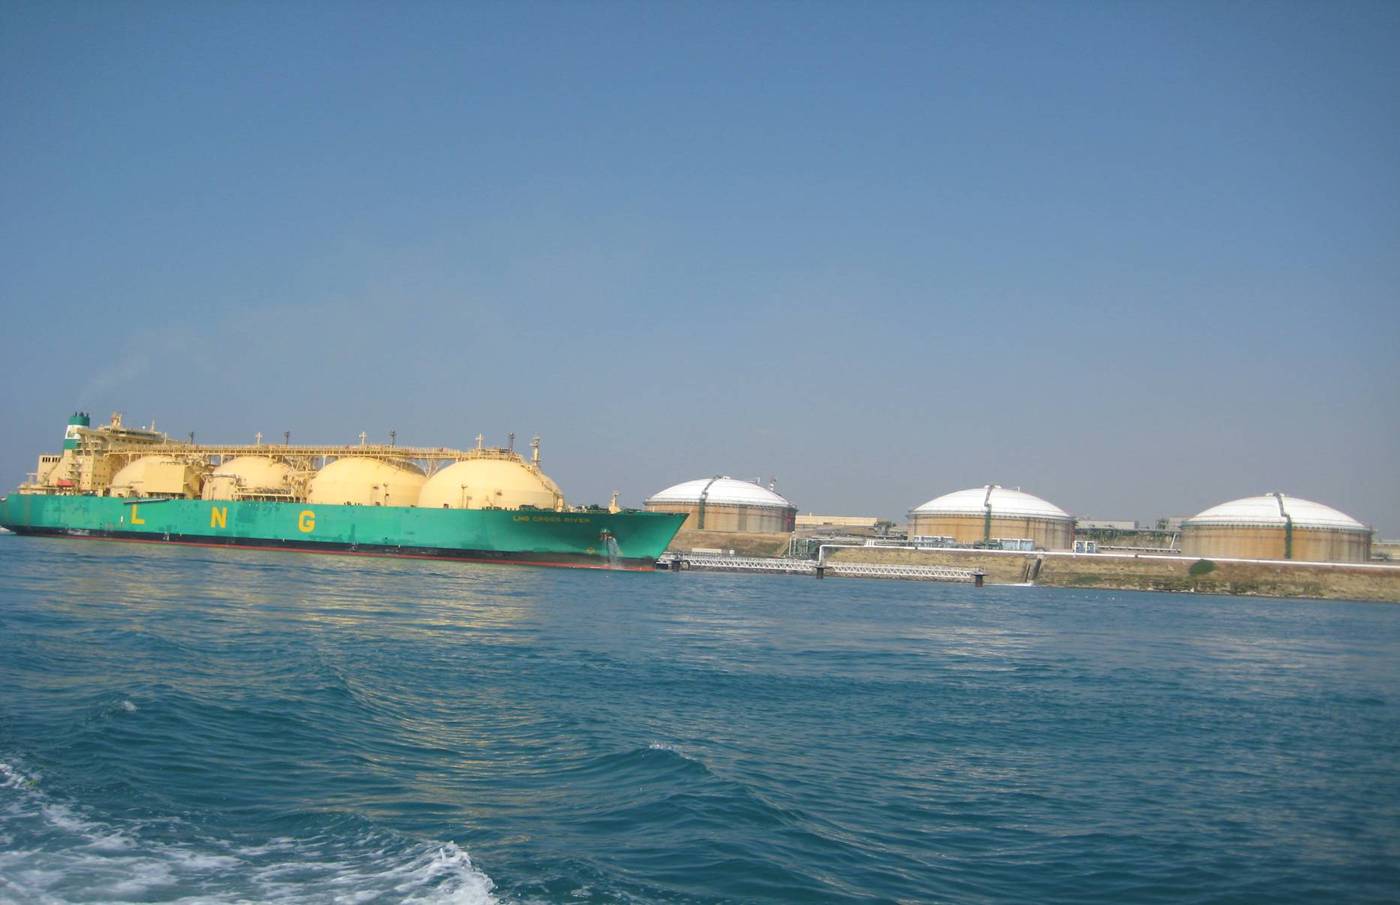 Botas looking to buy 70 LNG cargoes for 2020-2023 delivery